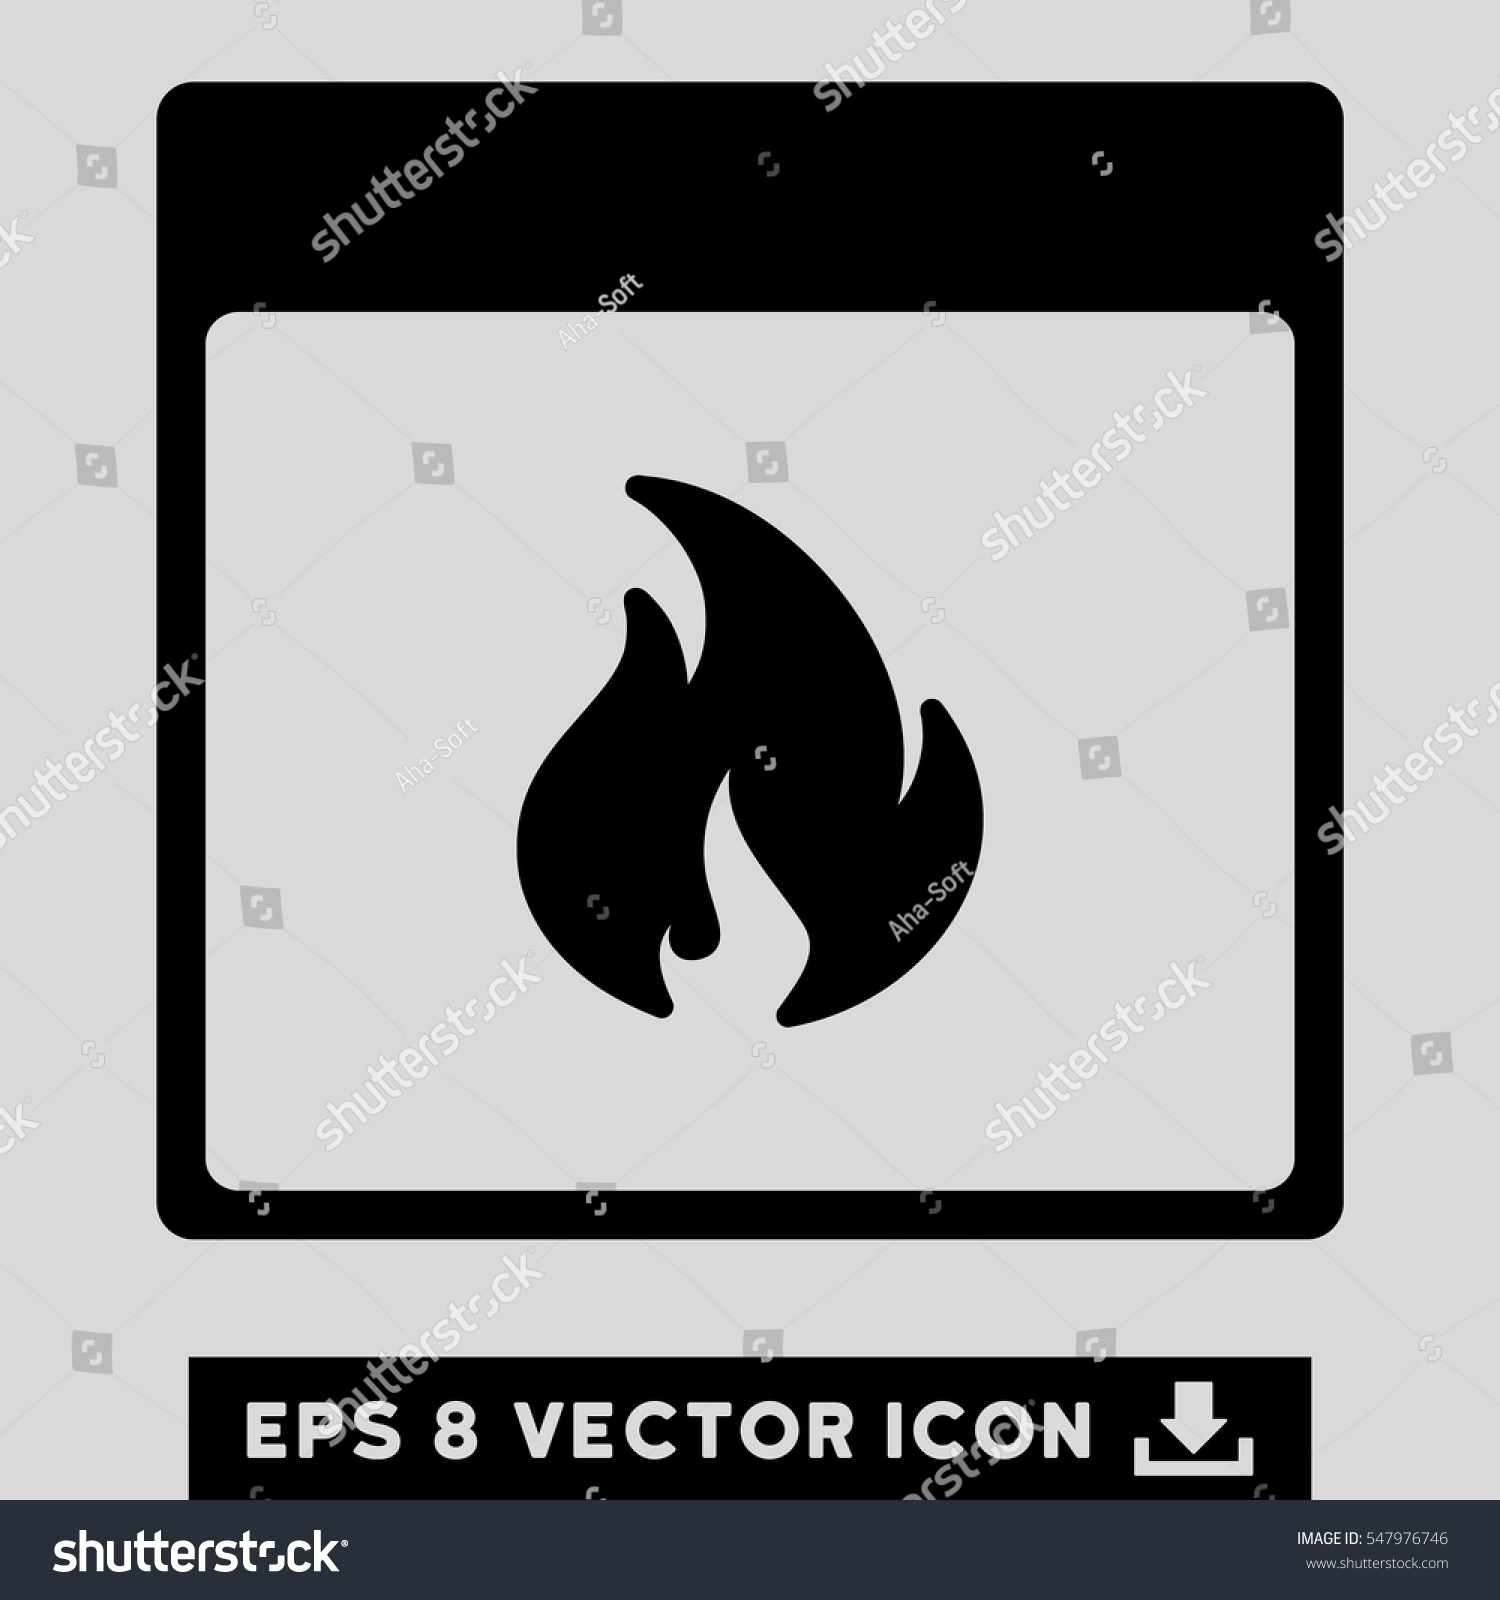 Thursday Calendar Page Icon. Vector EPS Illustration Style Is 